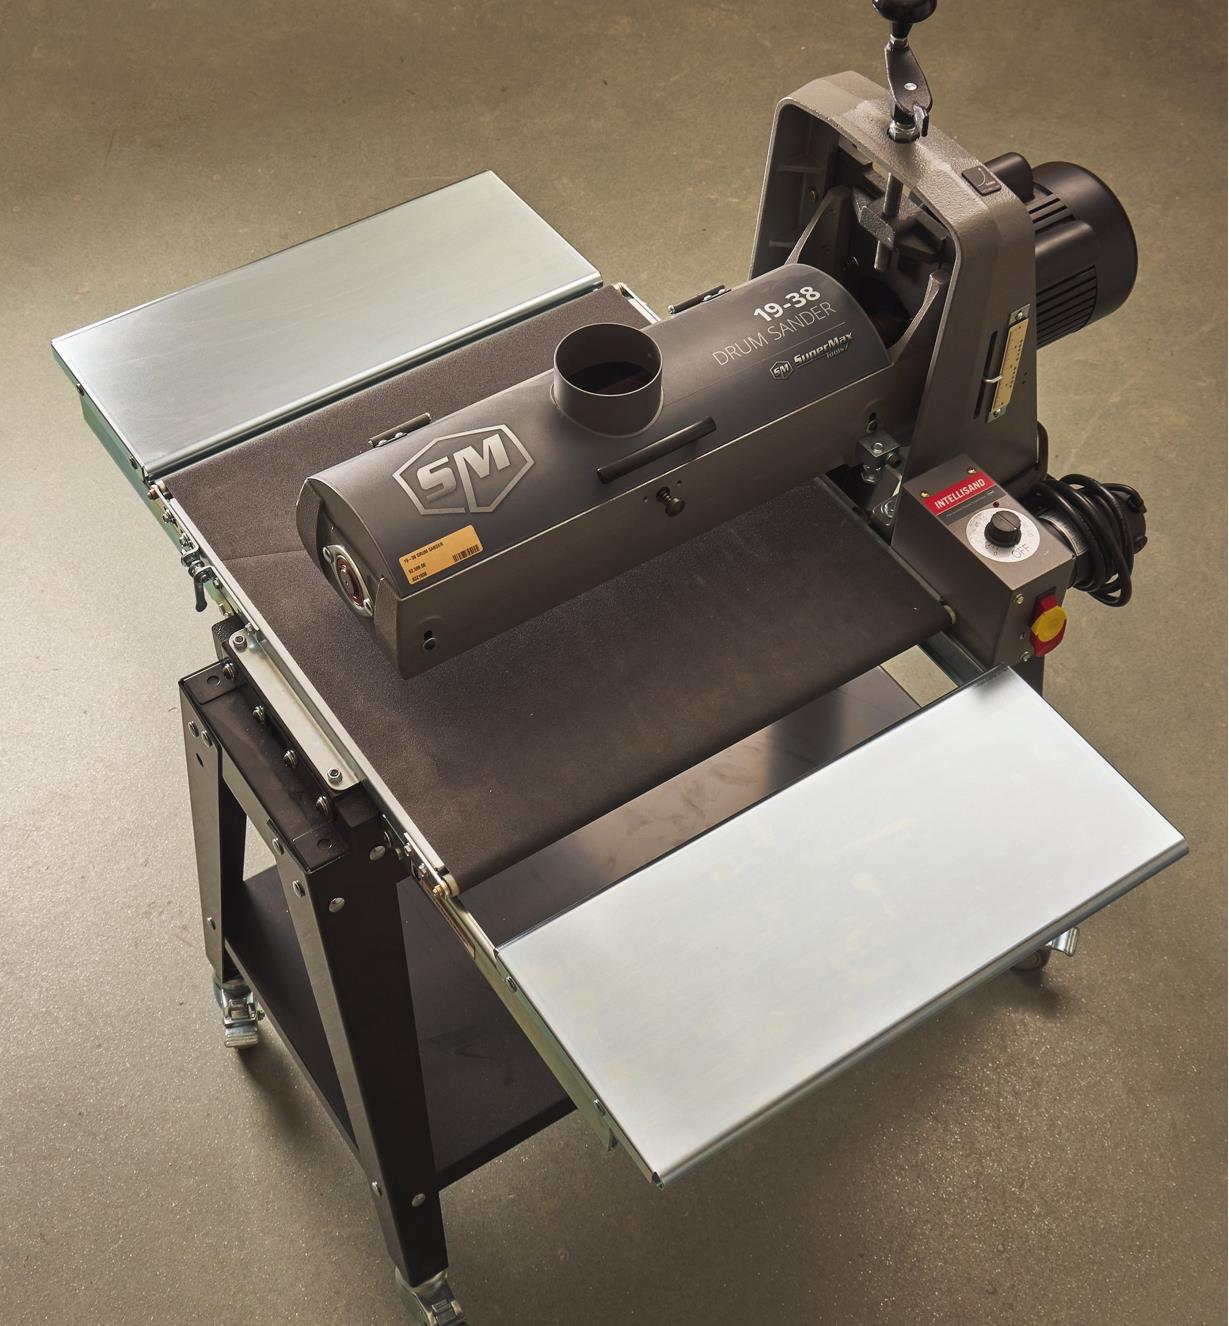 A drum sander with raised infeed/outfeed tables